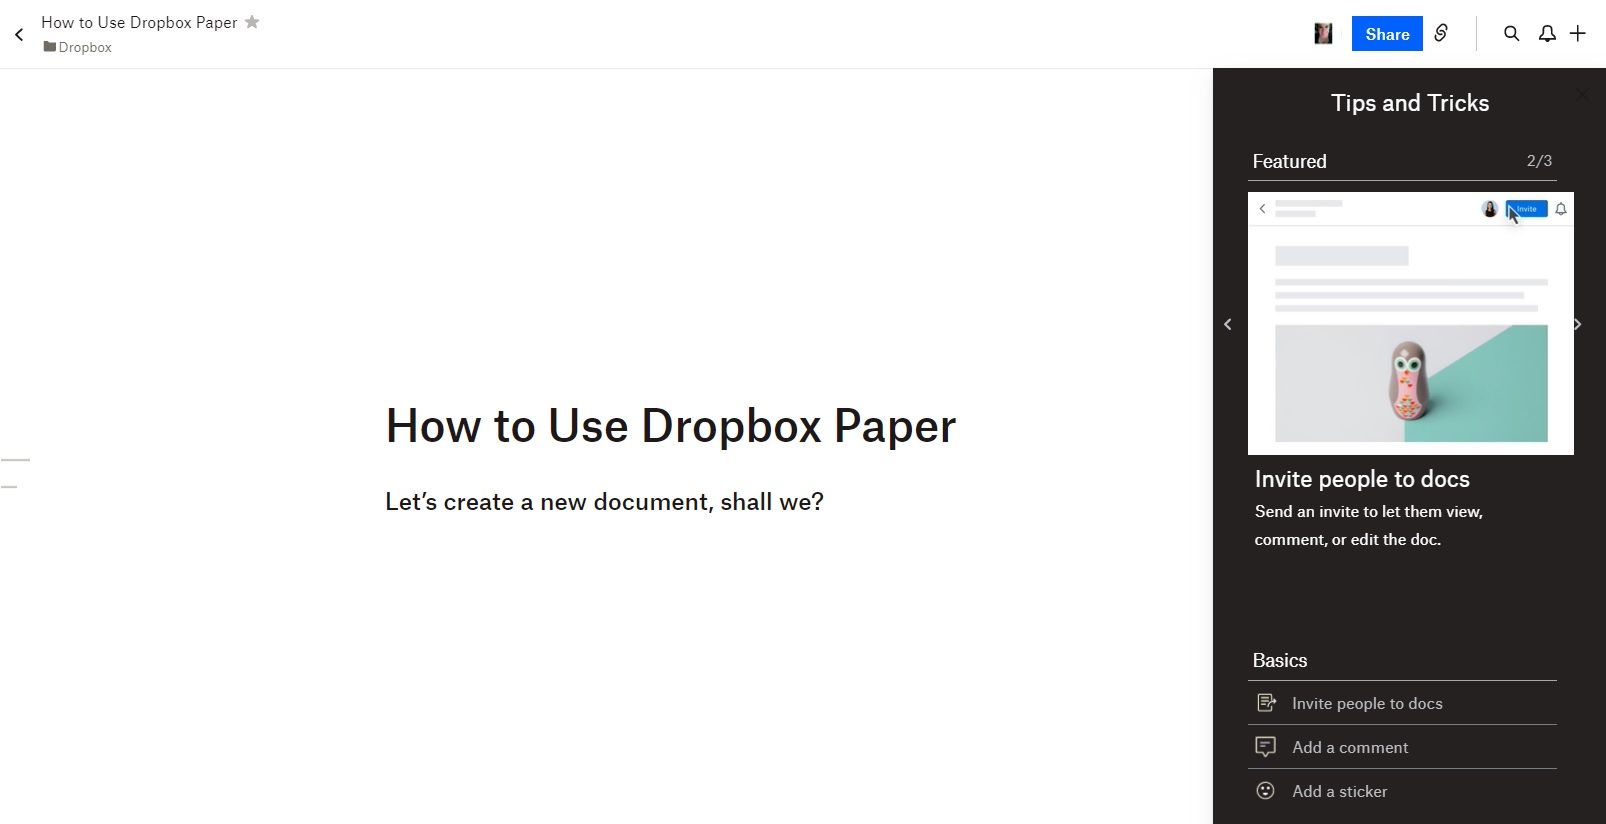 Image shows a new document created inside Dropbox Paper